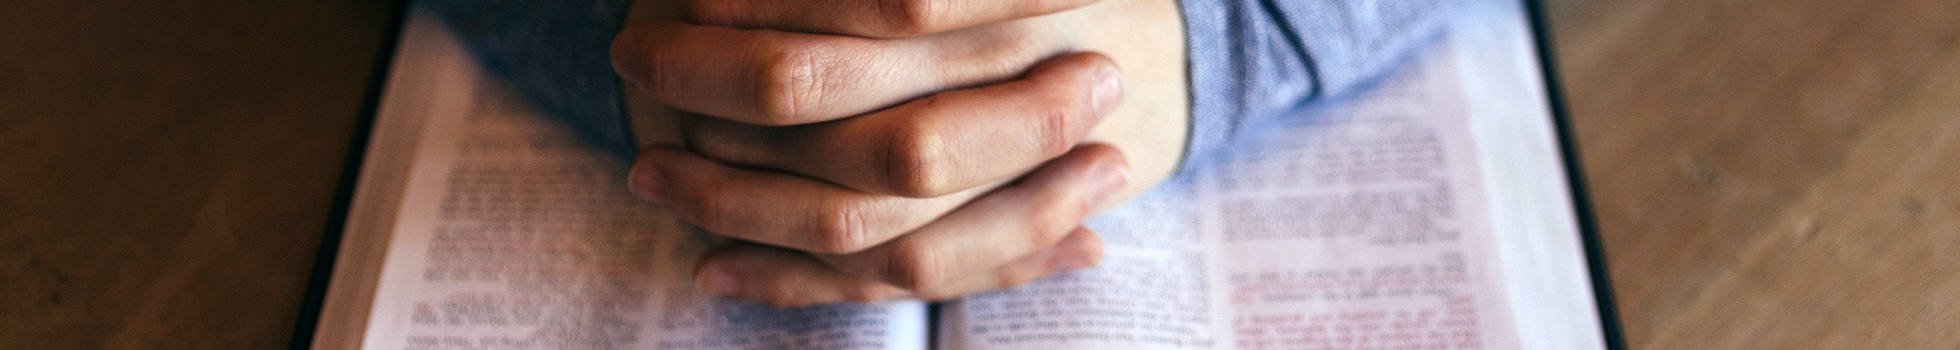 Hands praying over a Bible.